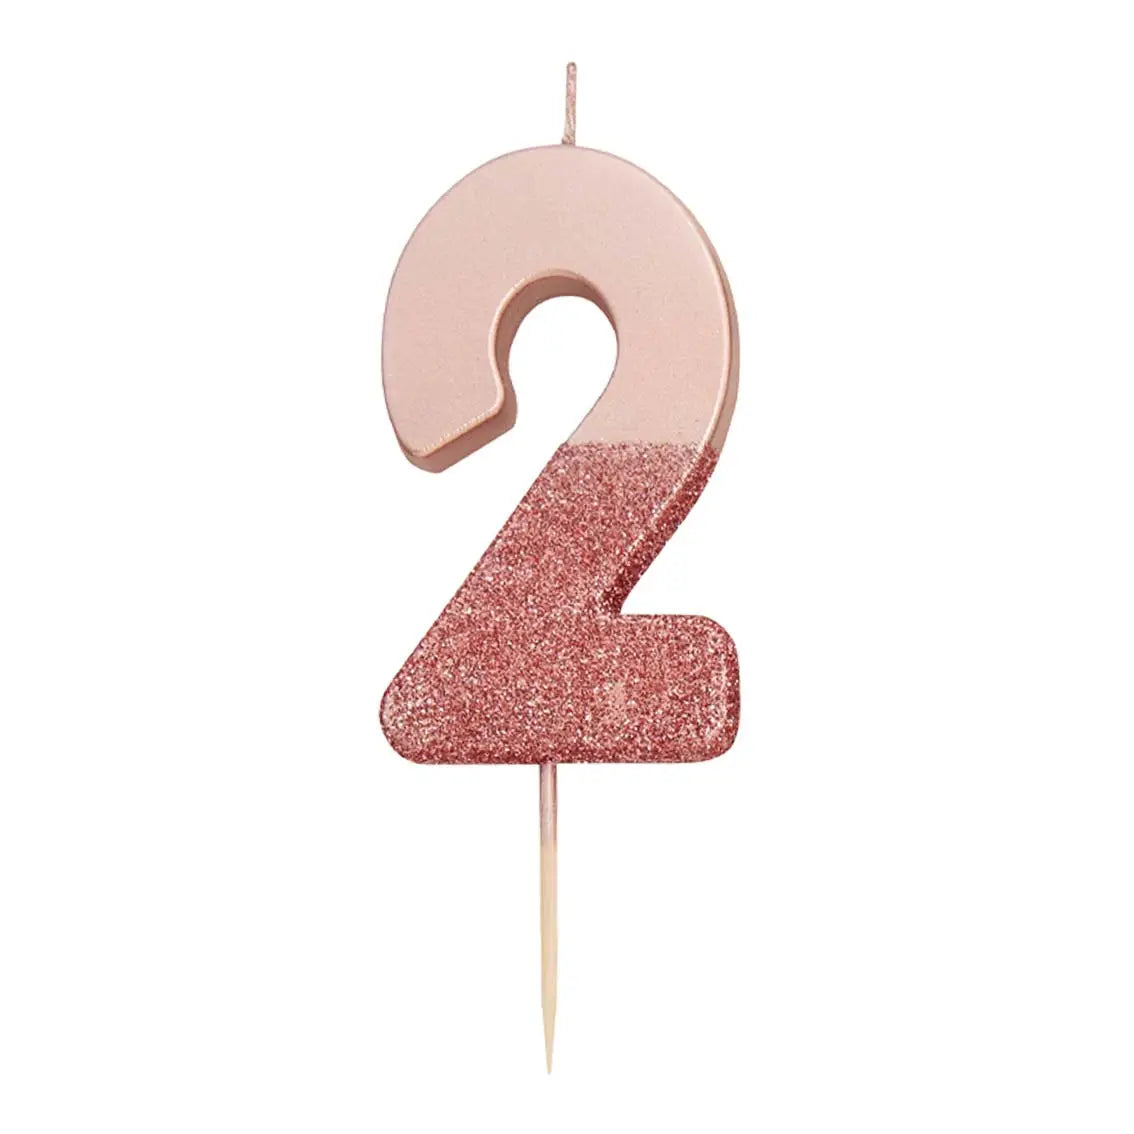 Rose Gold Glitter Number Candle - Two